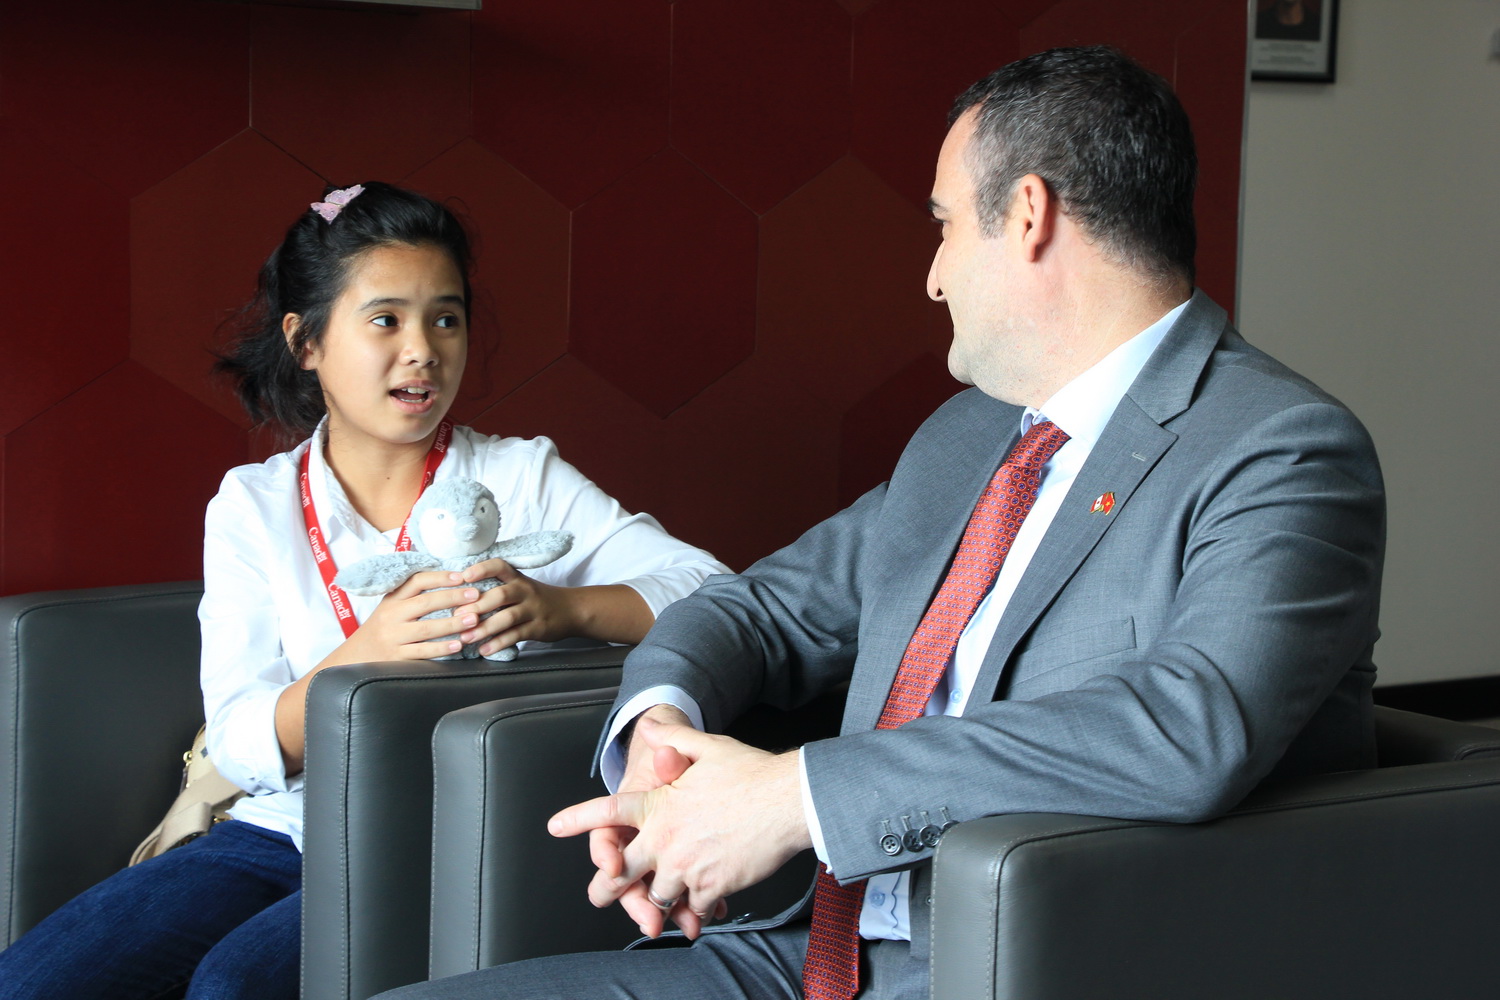 Ninth grader Pham Quynh Phuong talks to Canadian Consul General Kyle Nunas at the Consulate General of Canada in Ho Chi Minh City on June 7, 2018. Photo: Dong Nguyen/ Tuoi Tre News